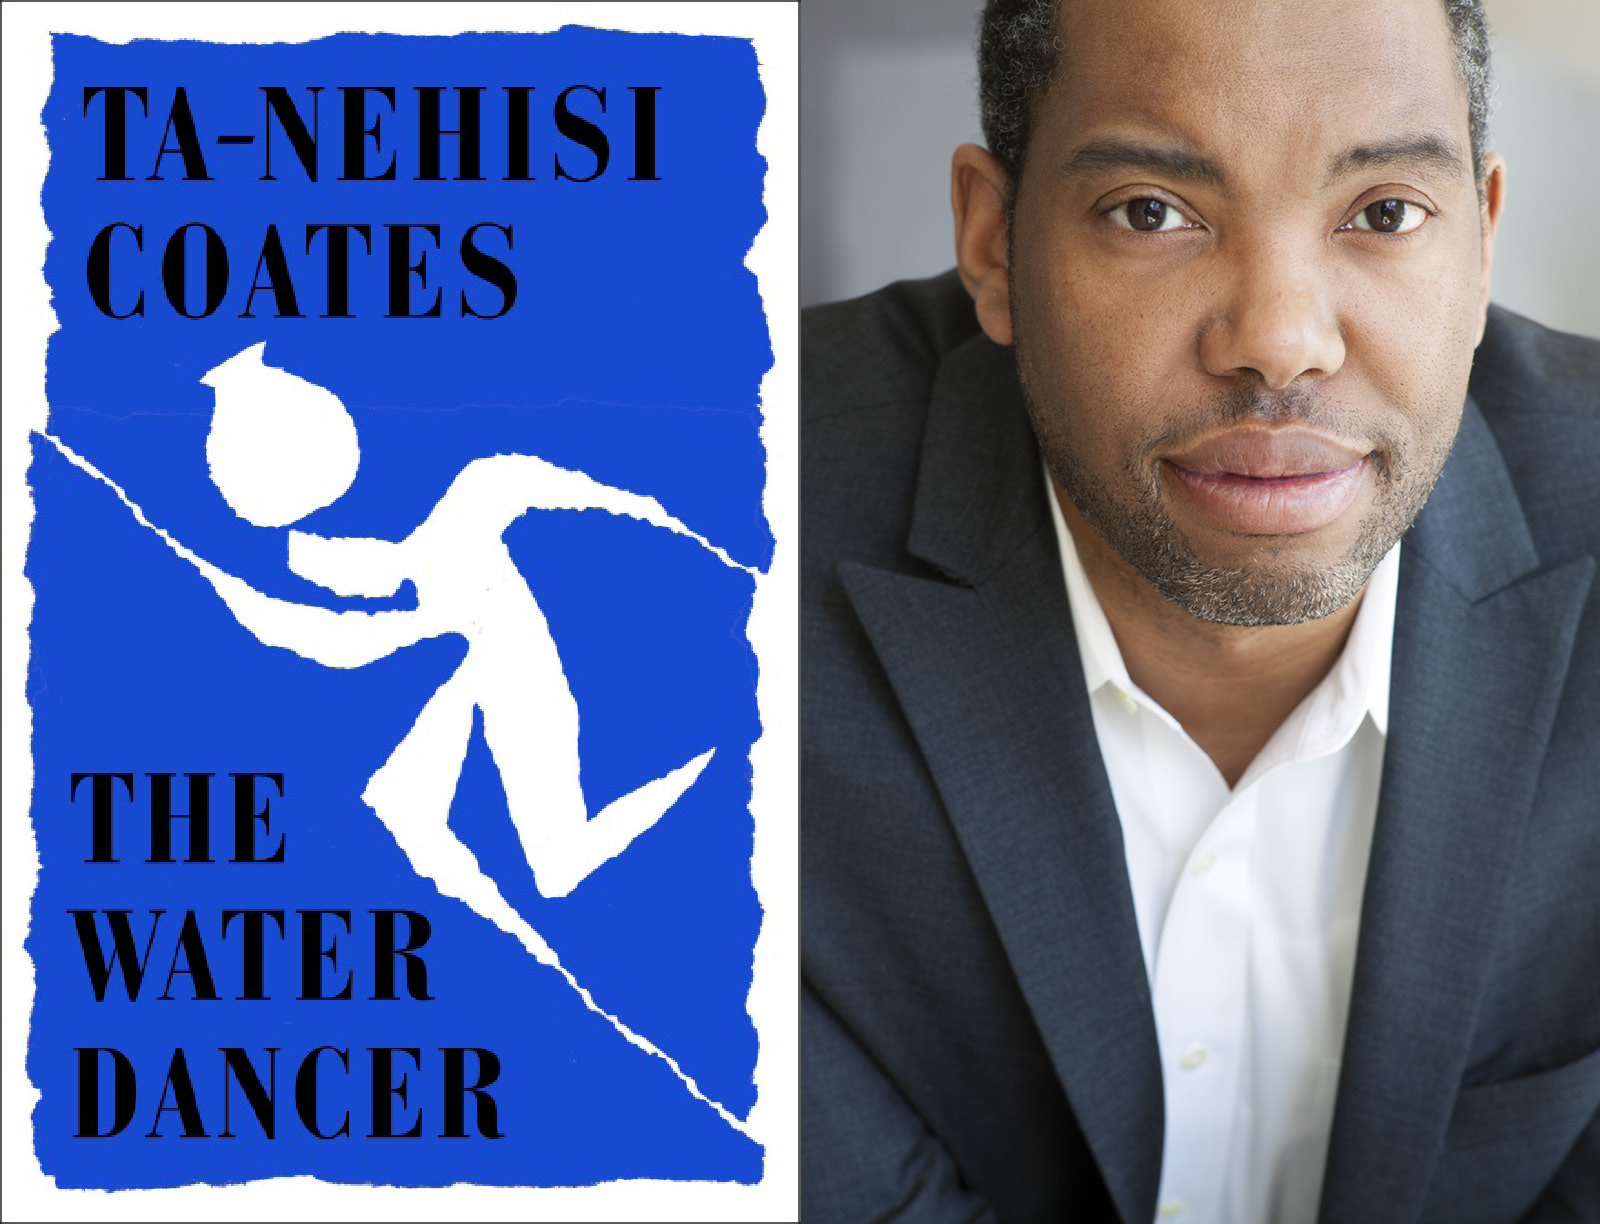  The Water Dancer by Ta-Nehisi Coates